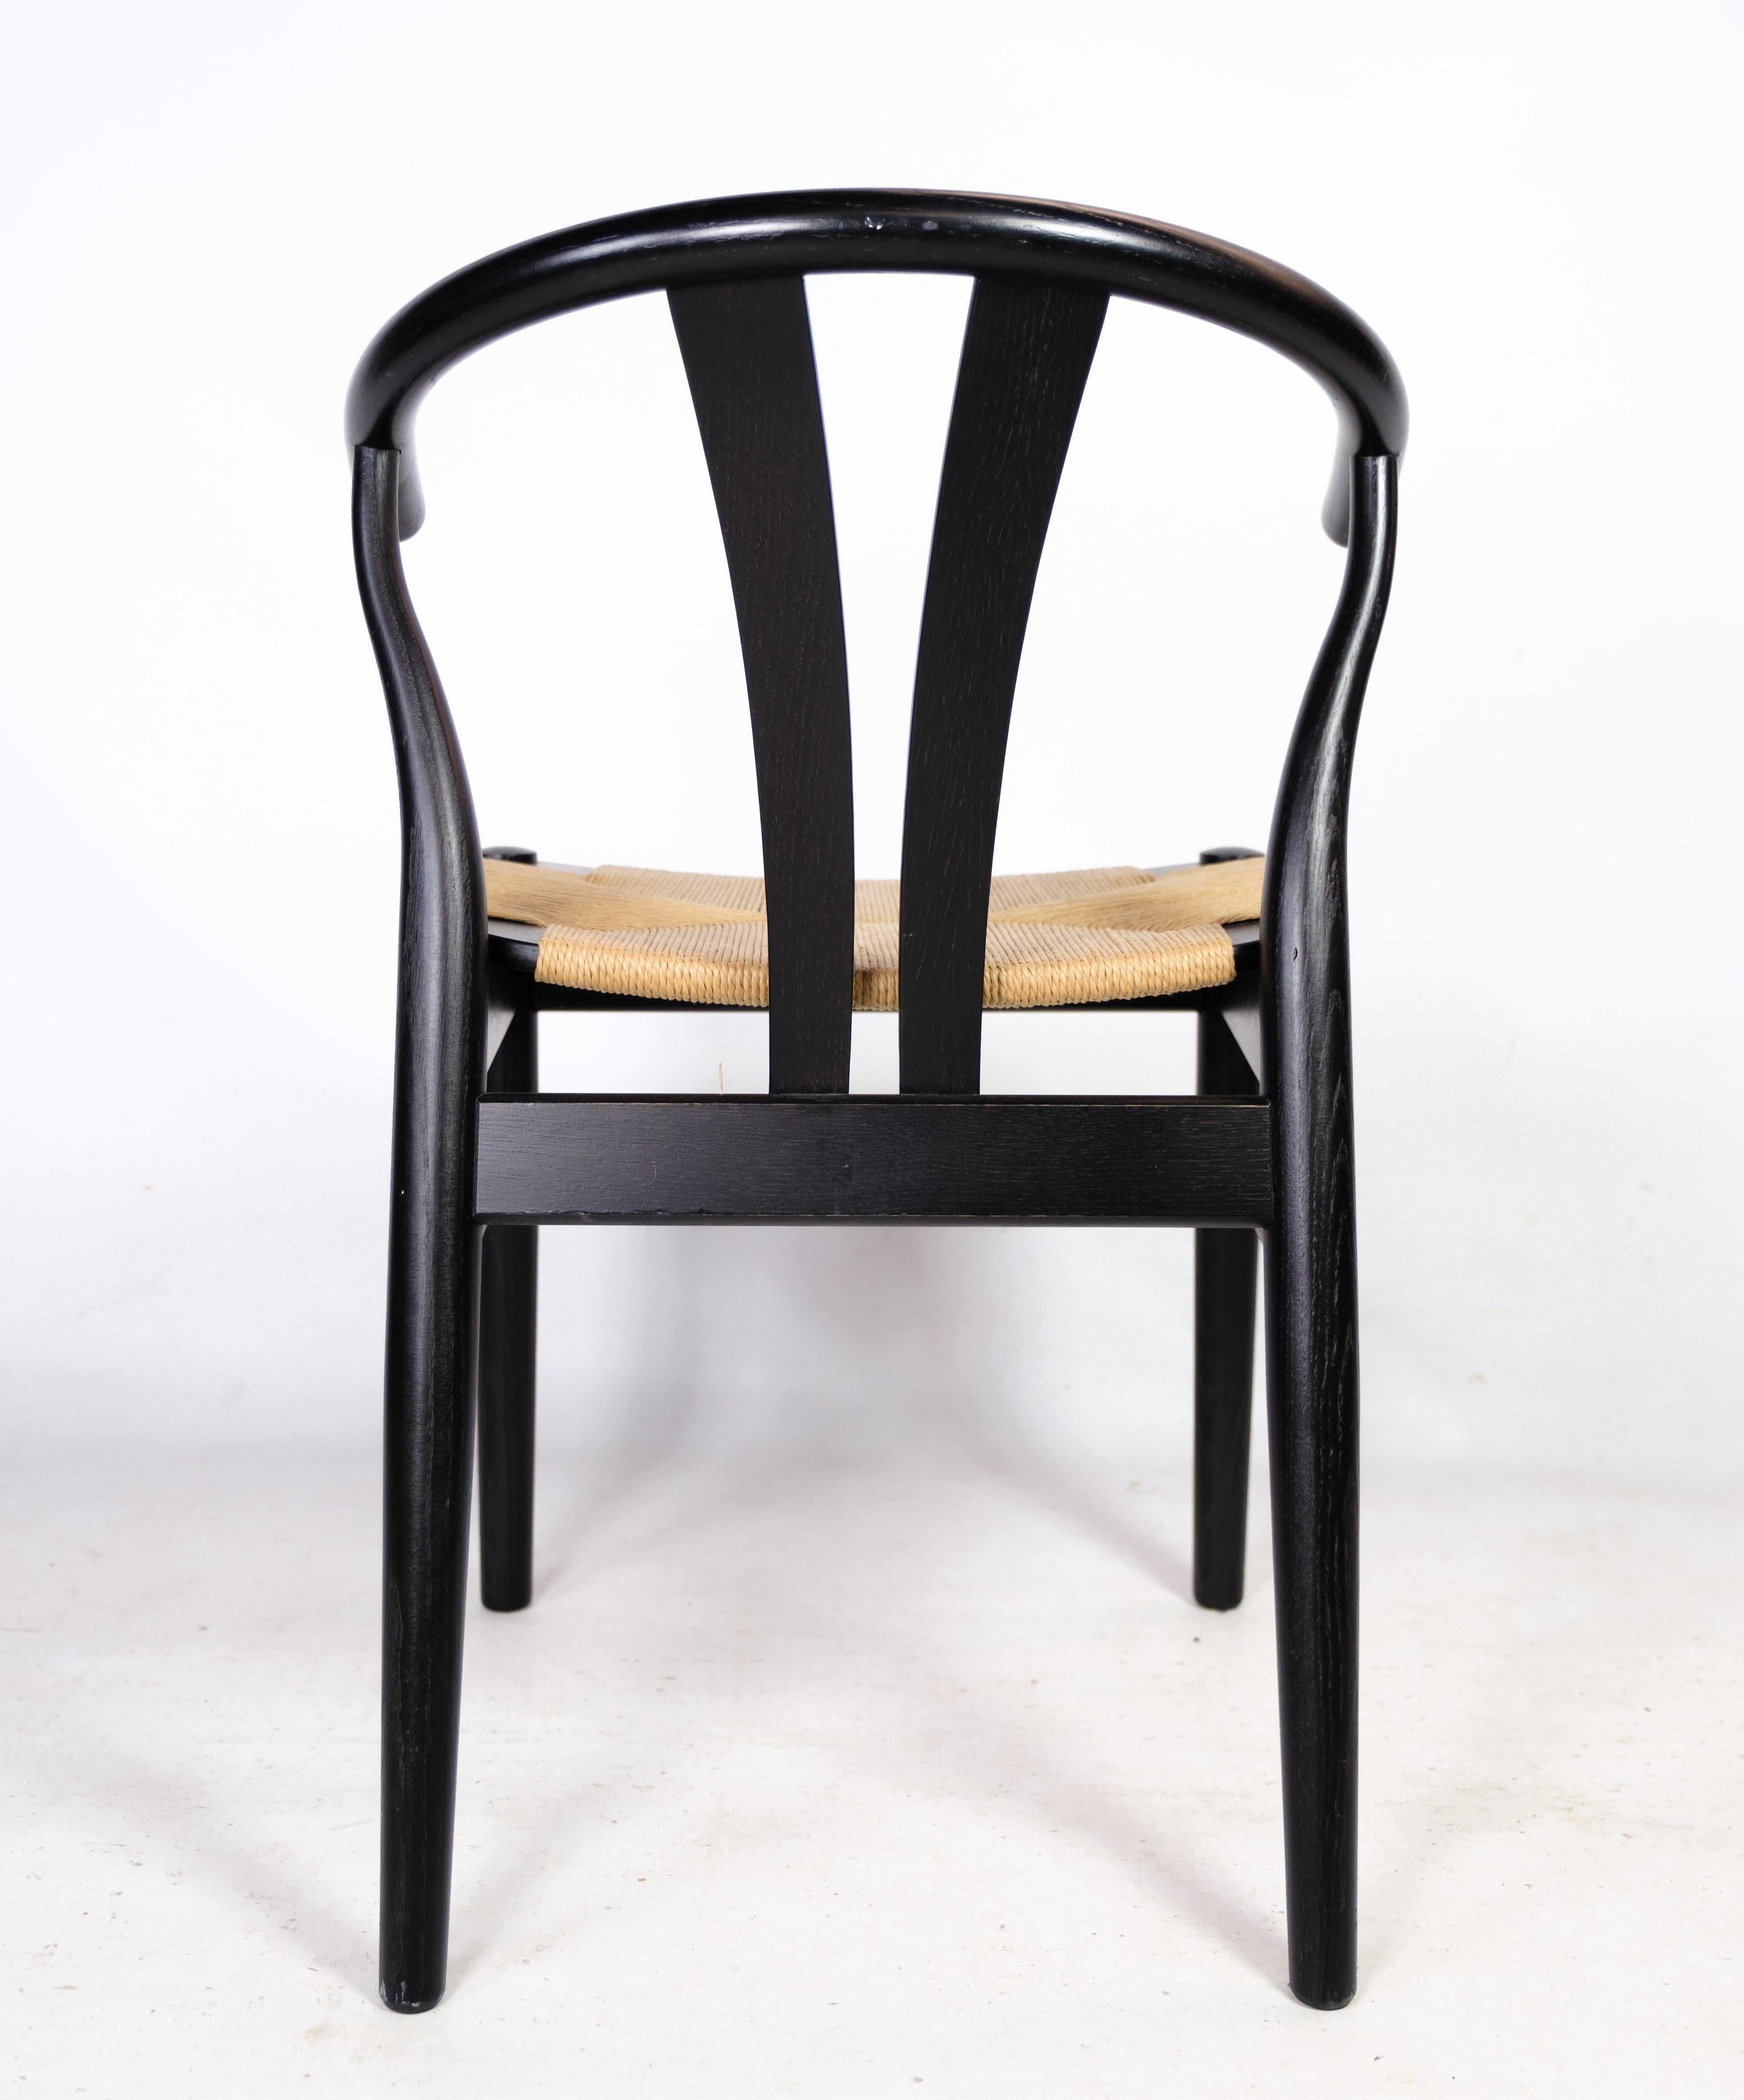 Scandinavian Modern, Pair of Chairs, Nordic Design, Findahl Møbelfabrik In Good Condition For Sale In Lejre, DK